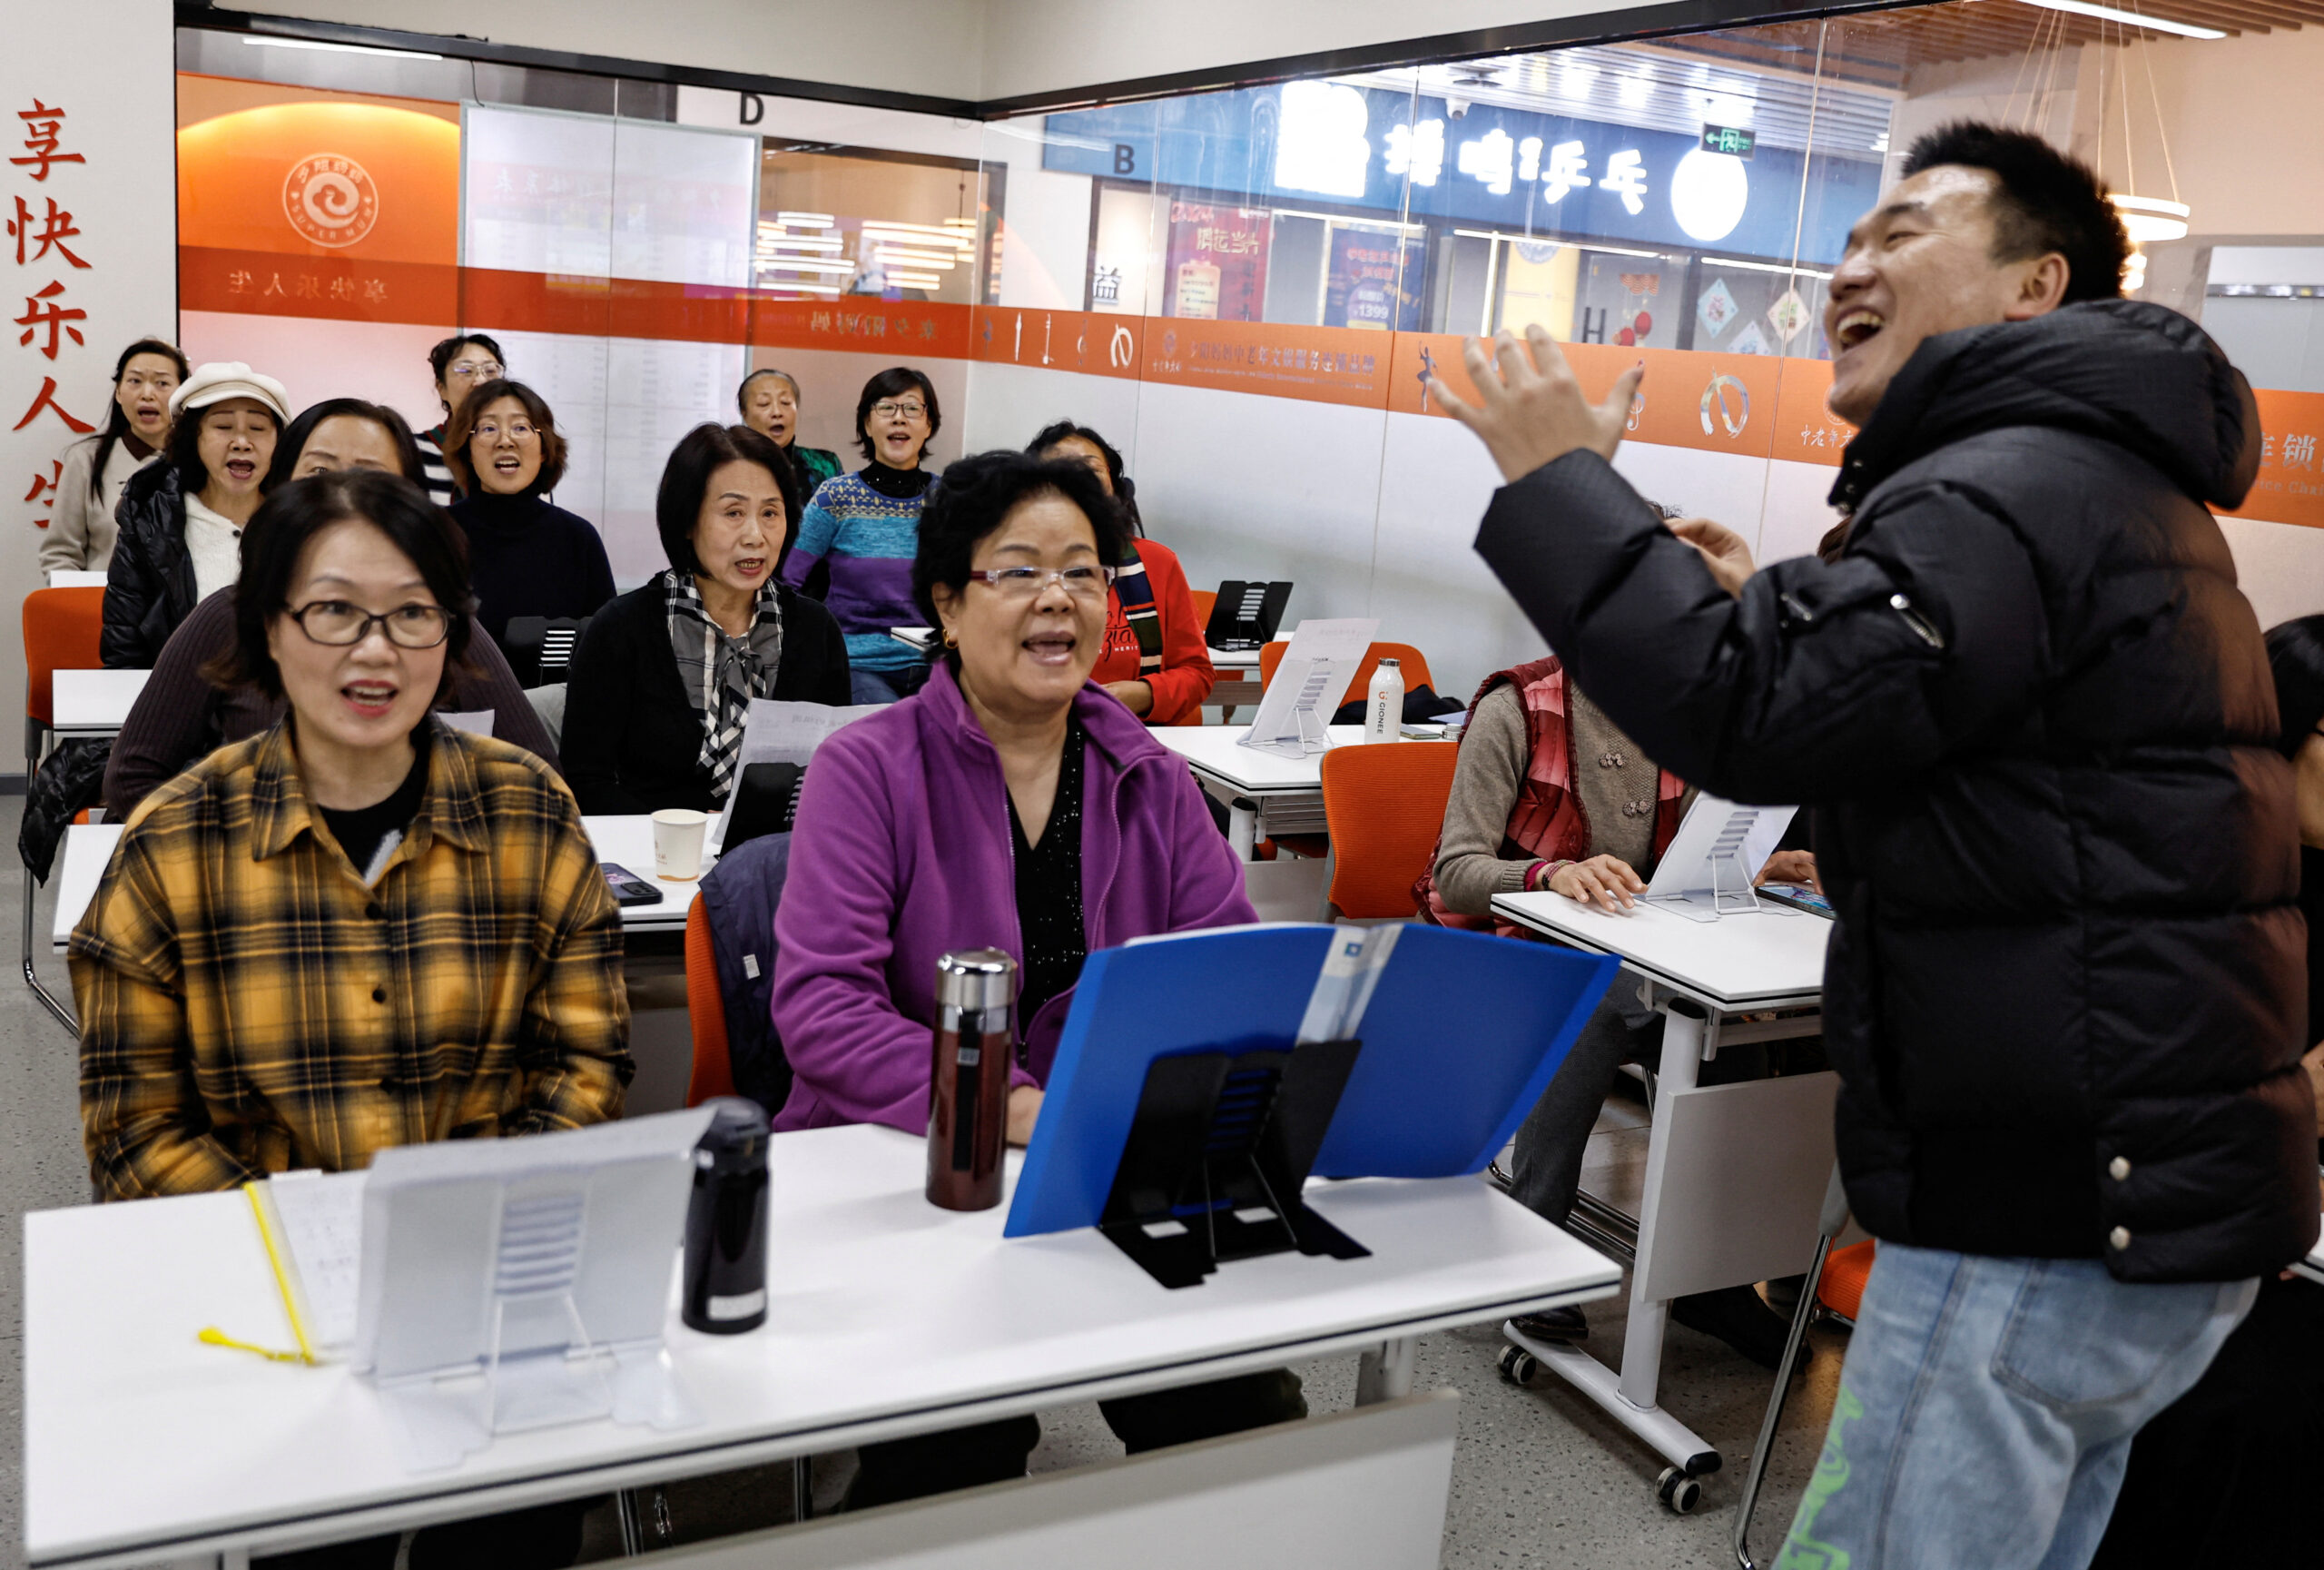 Silver lining: Tutoring the elderly is growing fast in China